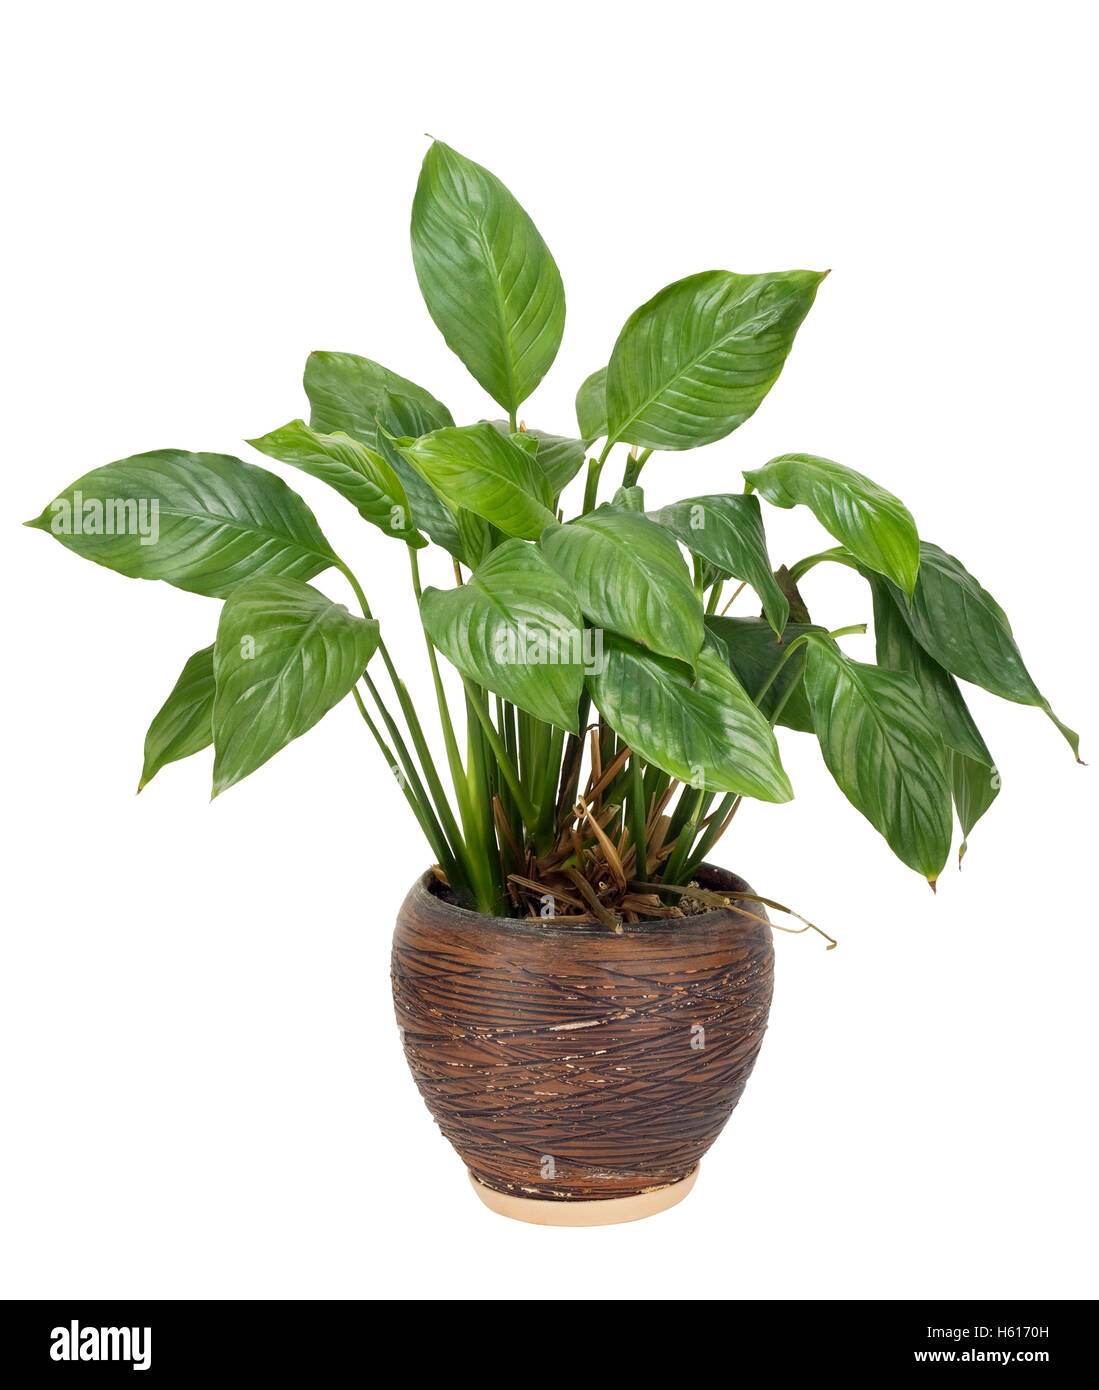 Very unpretentious simple no name green houseplant grows in a ceramic pot eternally. Isolated on white Stock Photo